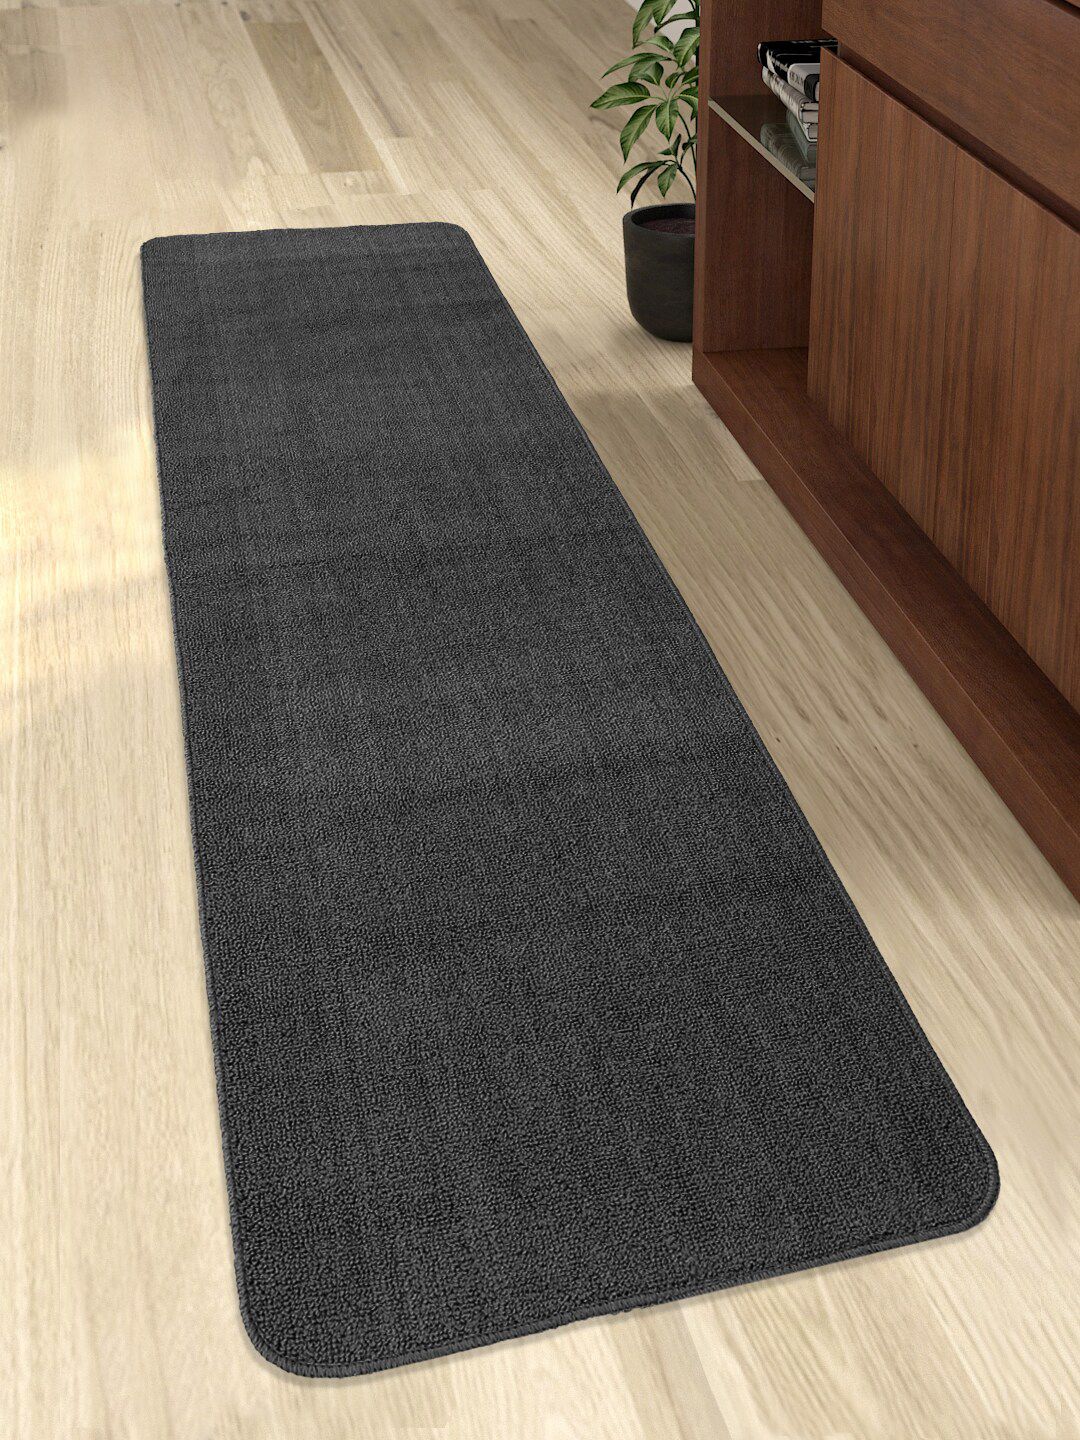 Saral Home Charcoal Grey Solid Antiskid Floor Runner Price in India